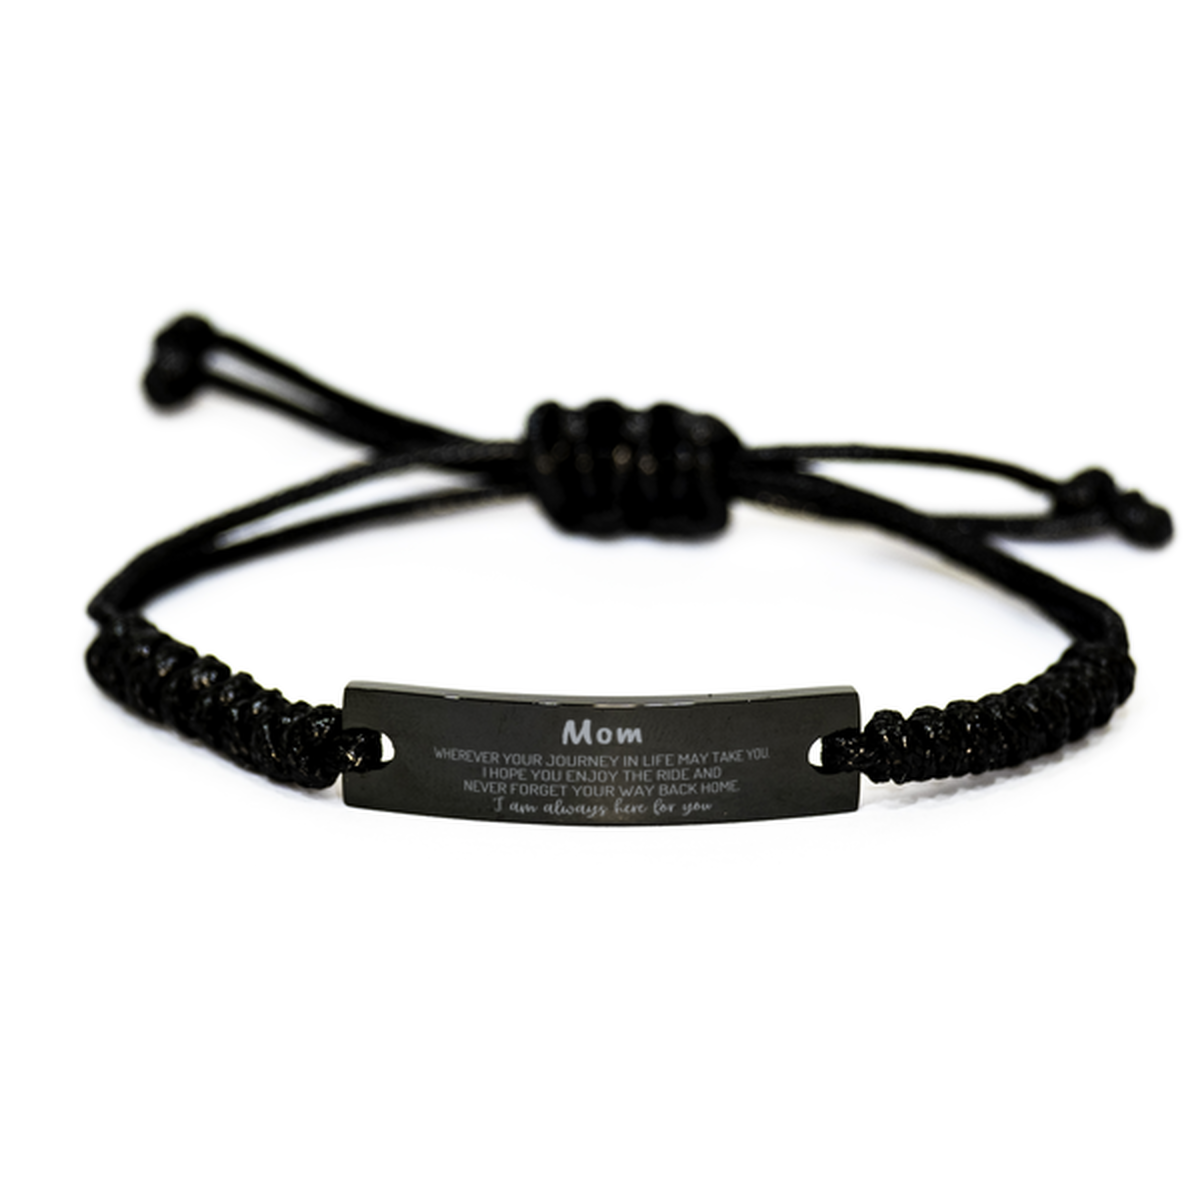 Mom wherever your journey in life may take you, I am always here for you Mom Black Rope Bracelet, Awesome Christmas Gifts For Mom, Mom Birthday Gifts for Men Women Family Loved One